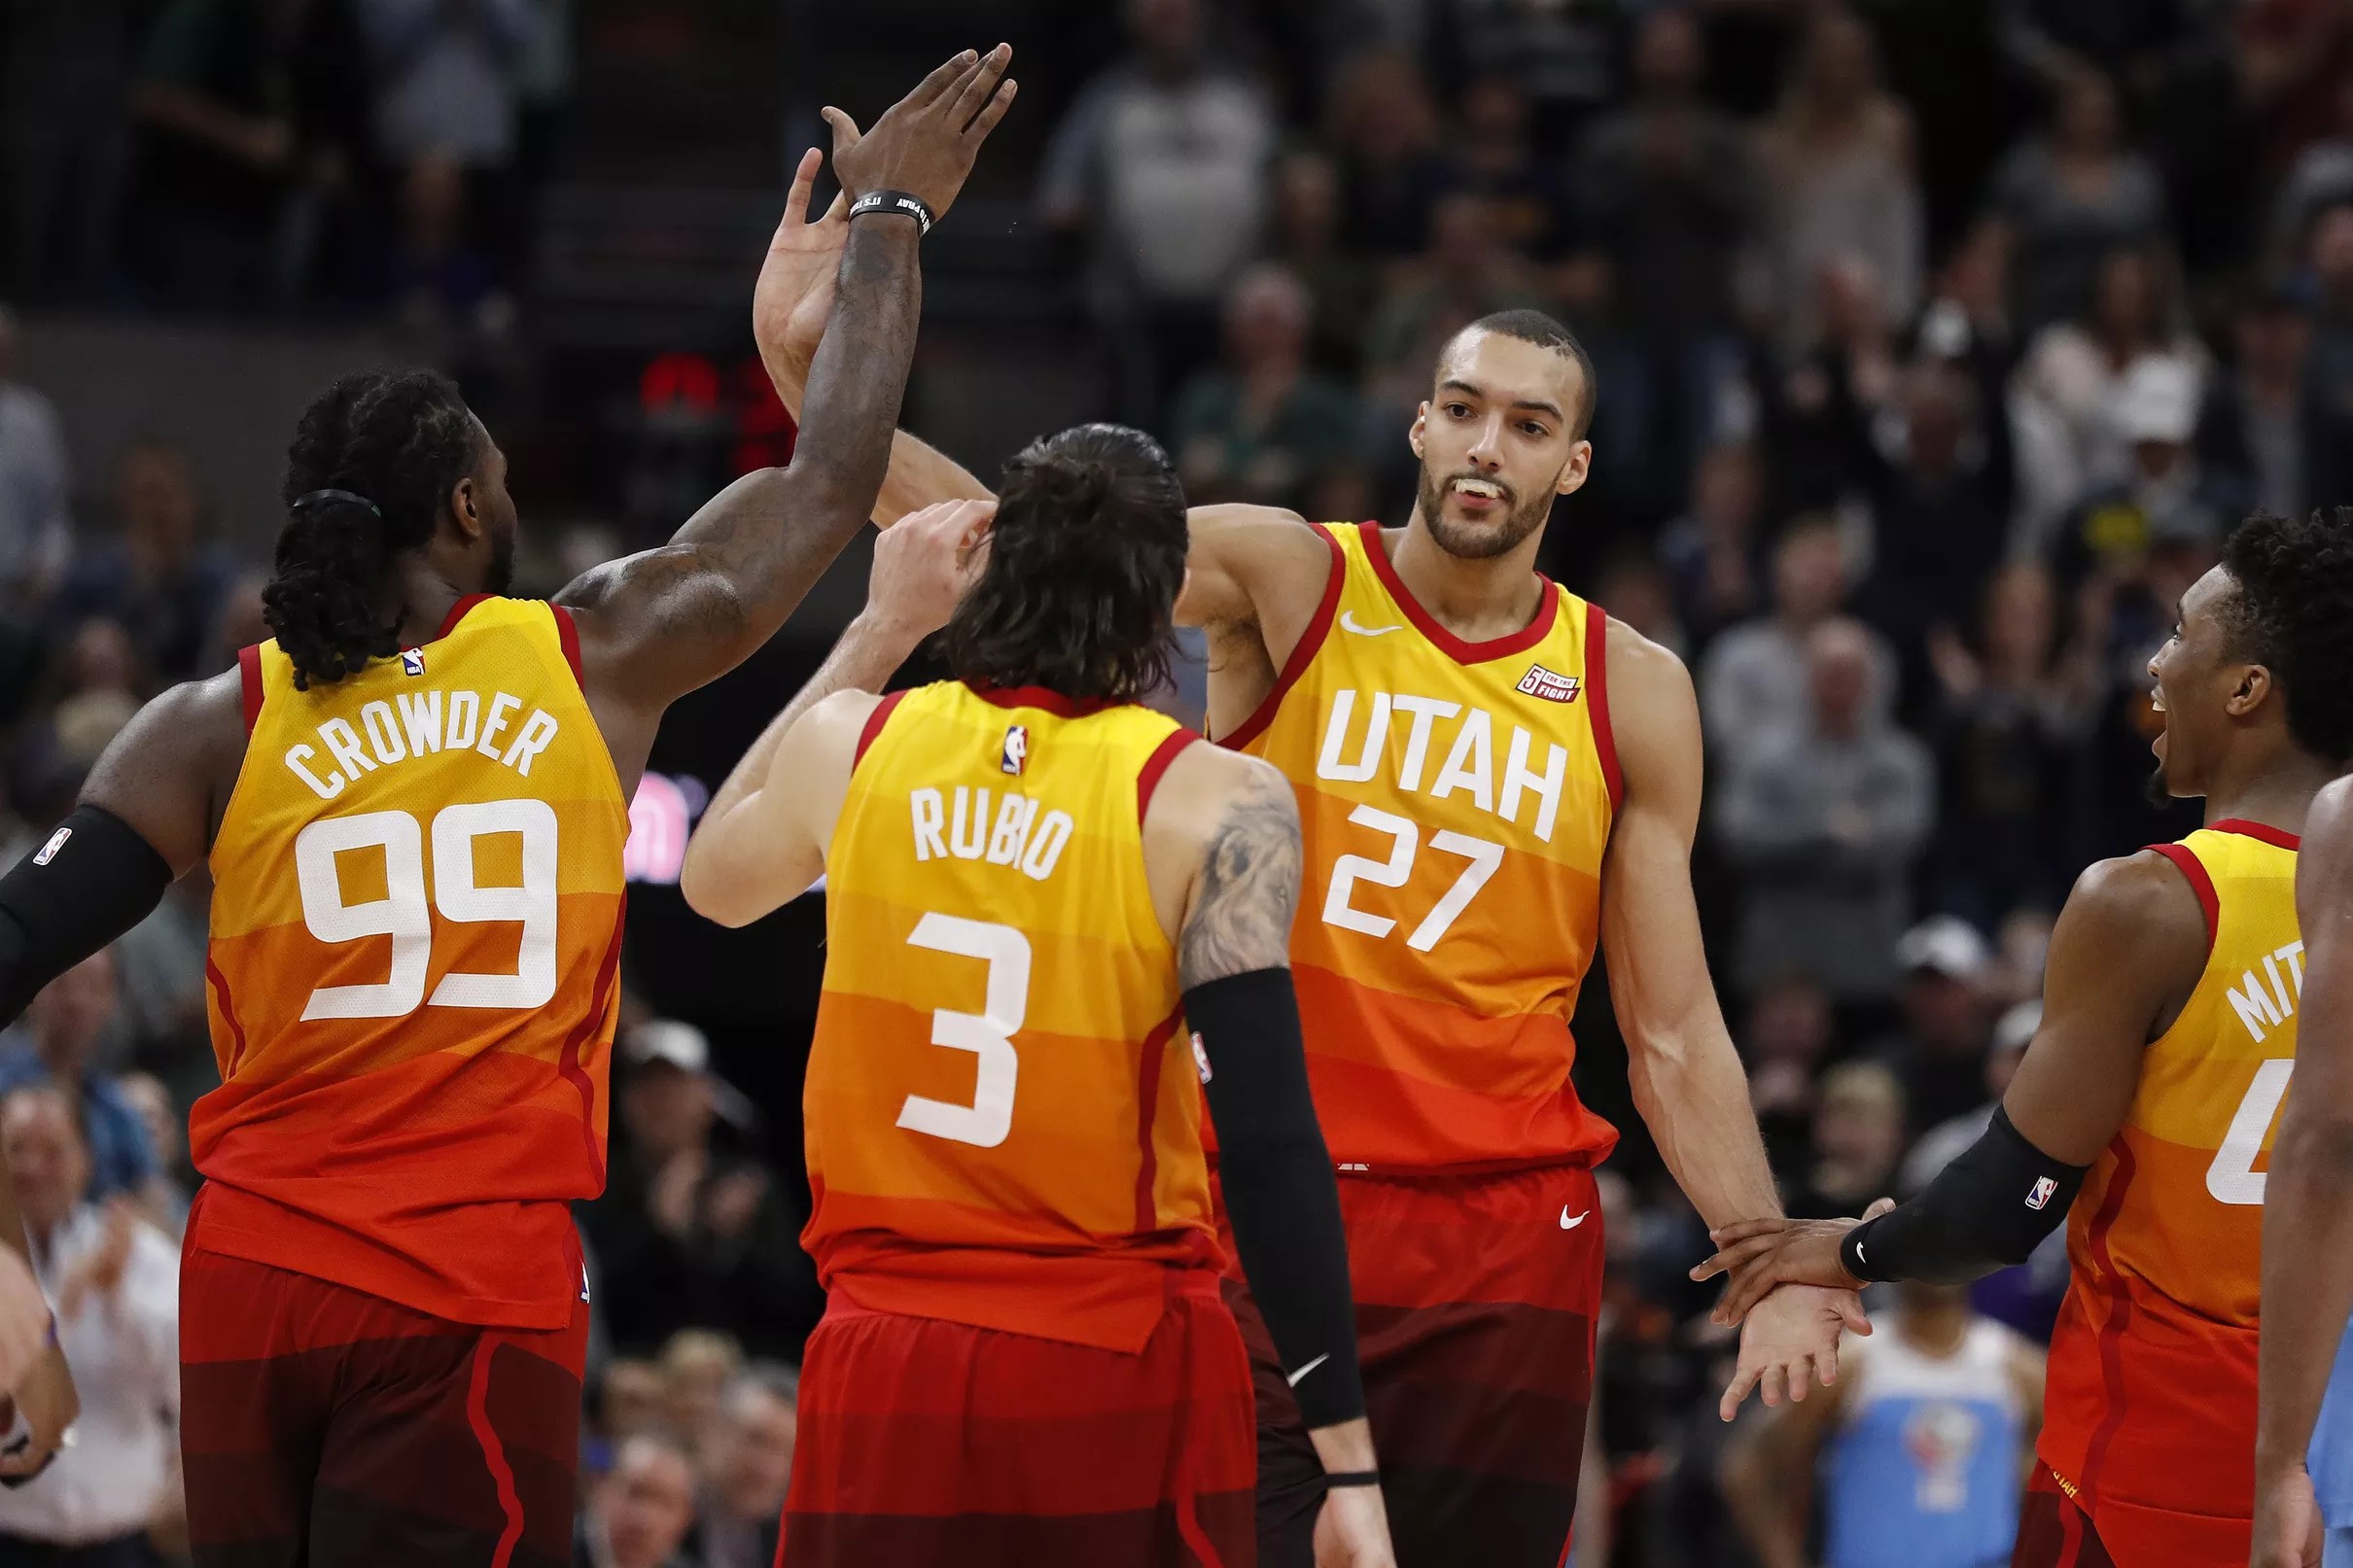 The Utah Jazz climb to 5th in the West with win over Sacramento Kings